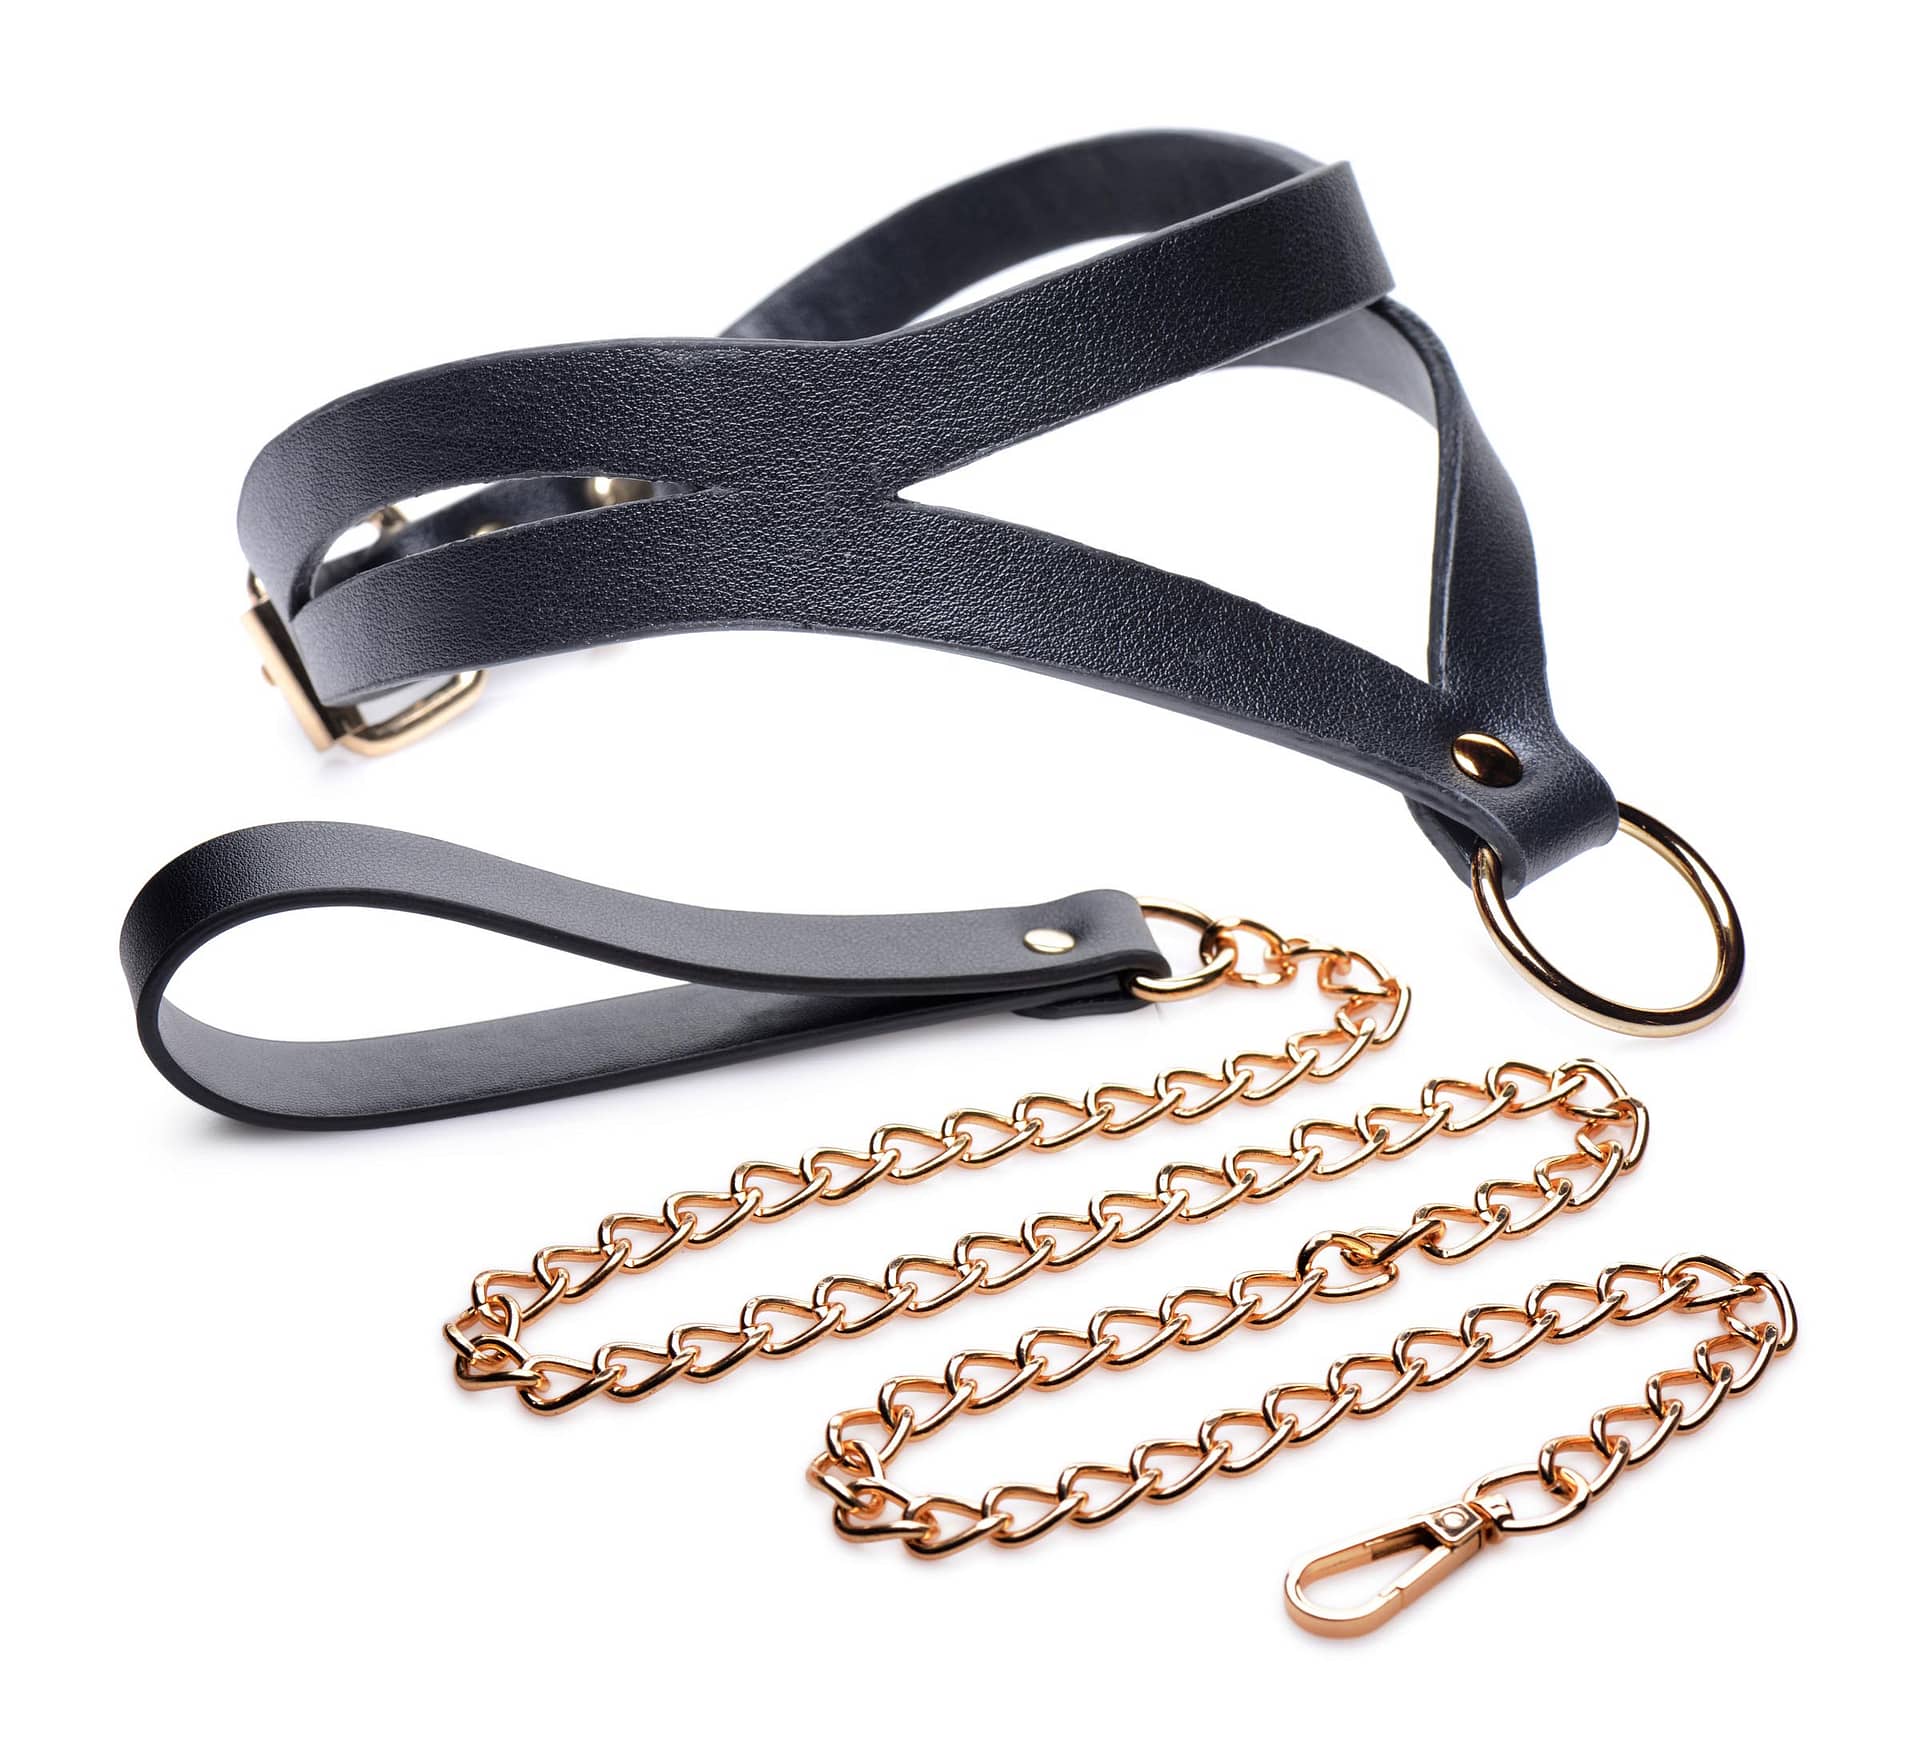 Black and Gold Collar with Leash Kit – The BDSM Toy Shop